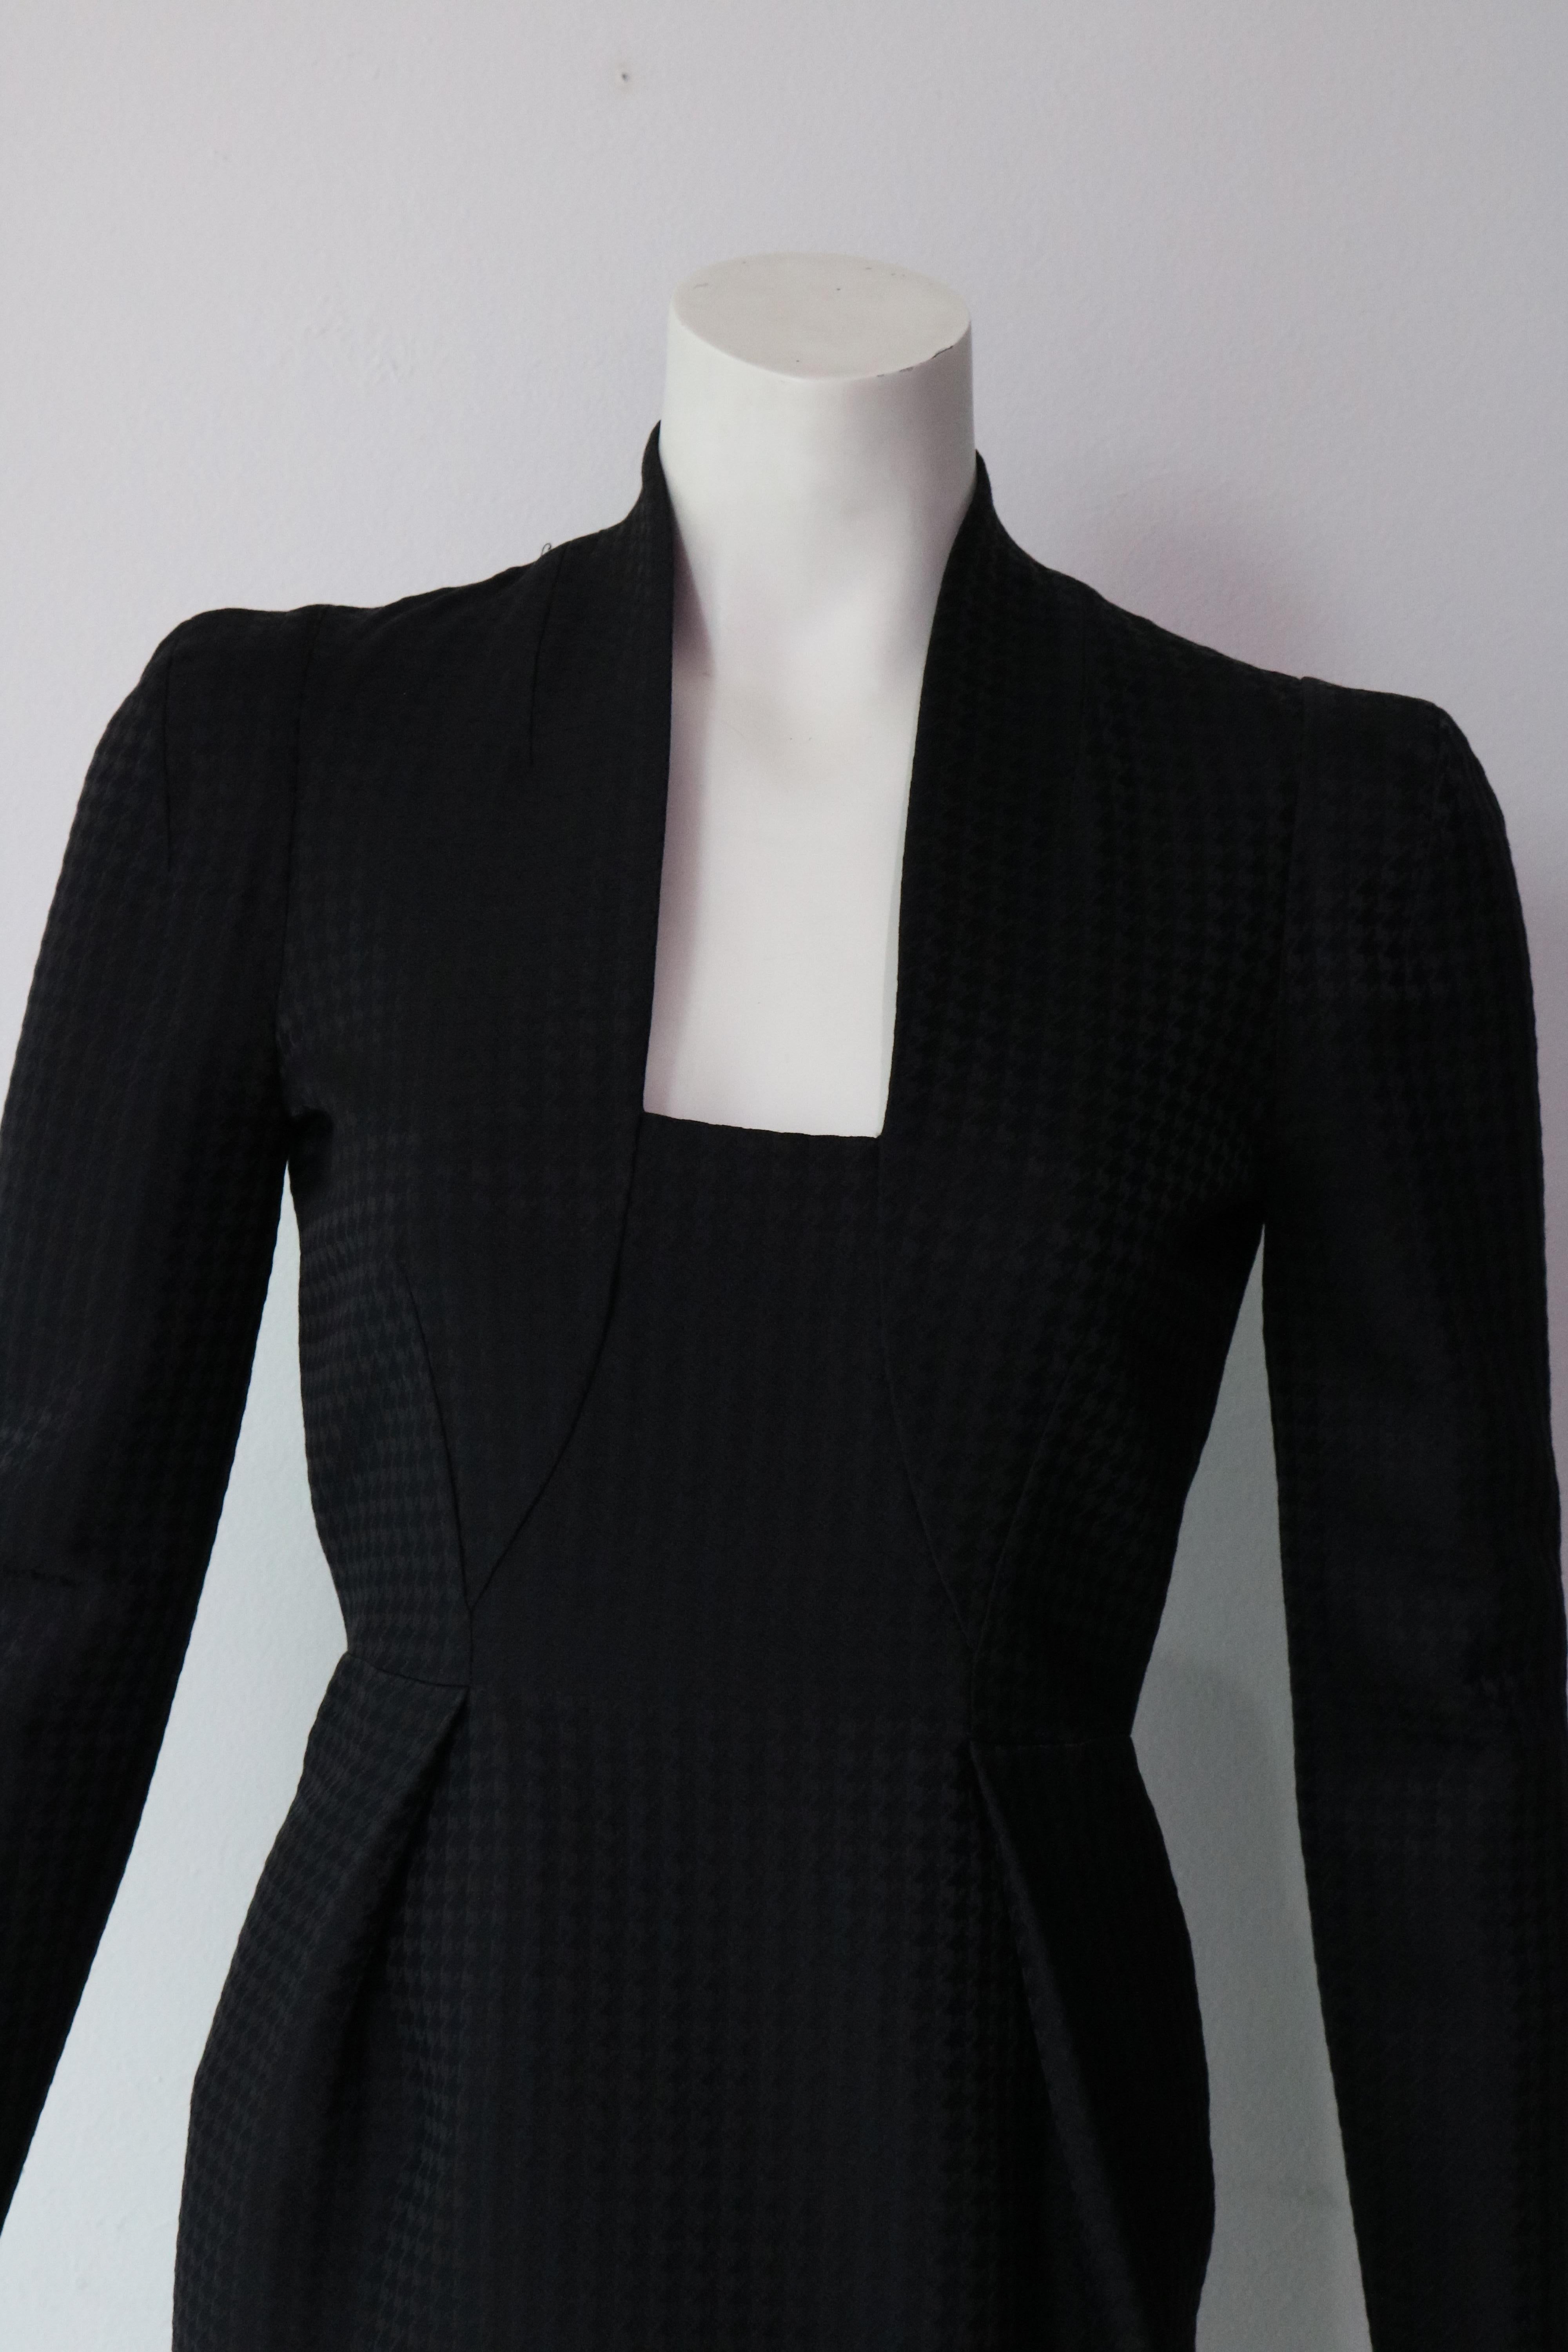 Chic and elegant black dress
86% wool 
14% silk 
Size 40 (fits smaller) 
Made in Italy 
Retail Price $2,500
Mint Condition 
